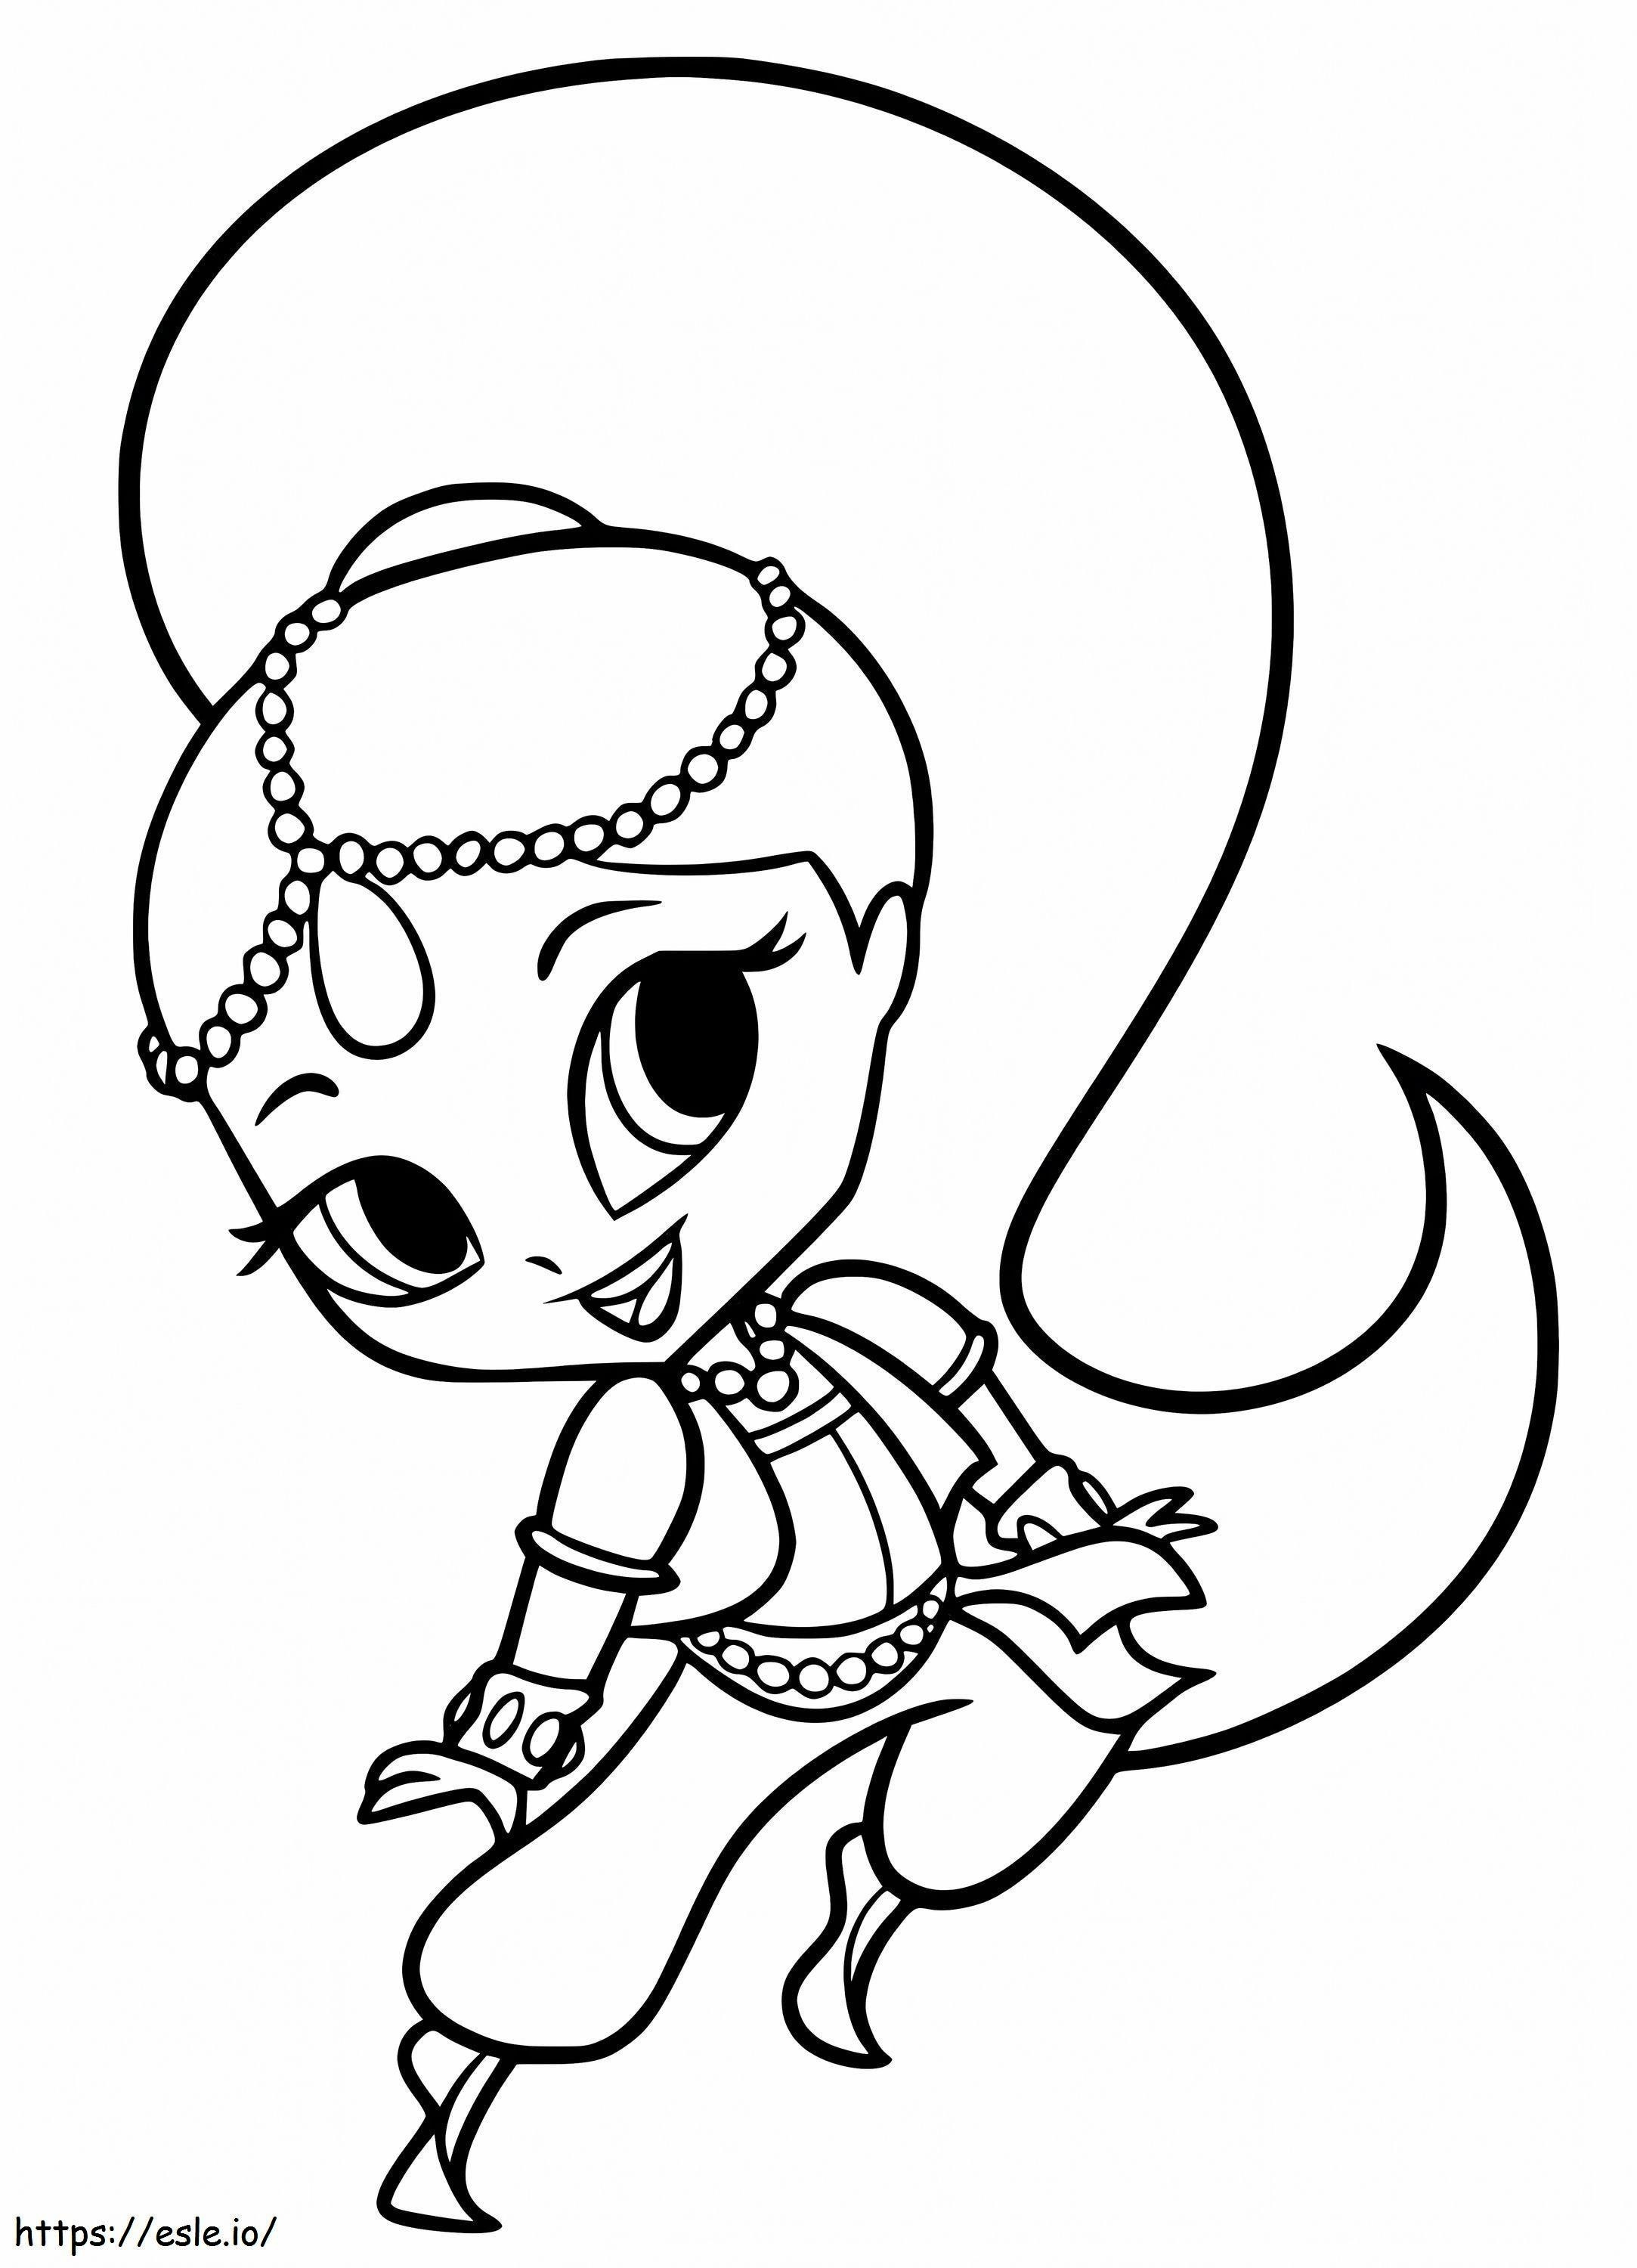 1571445551 106211 Full Coloring Book Ideas Shimmer And Shine Coloring Sheet Picture Ideas coloring page